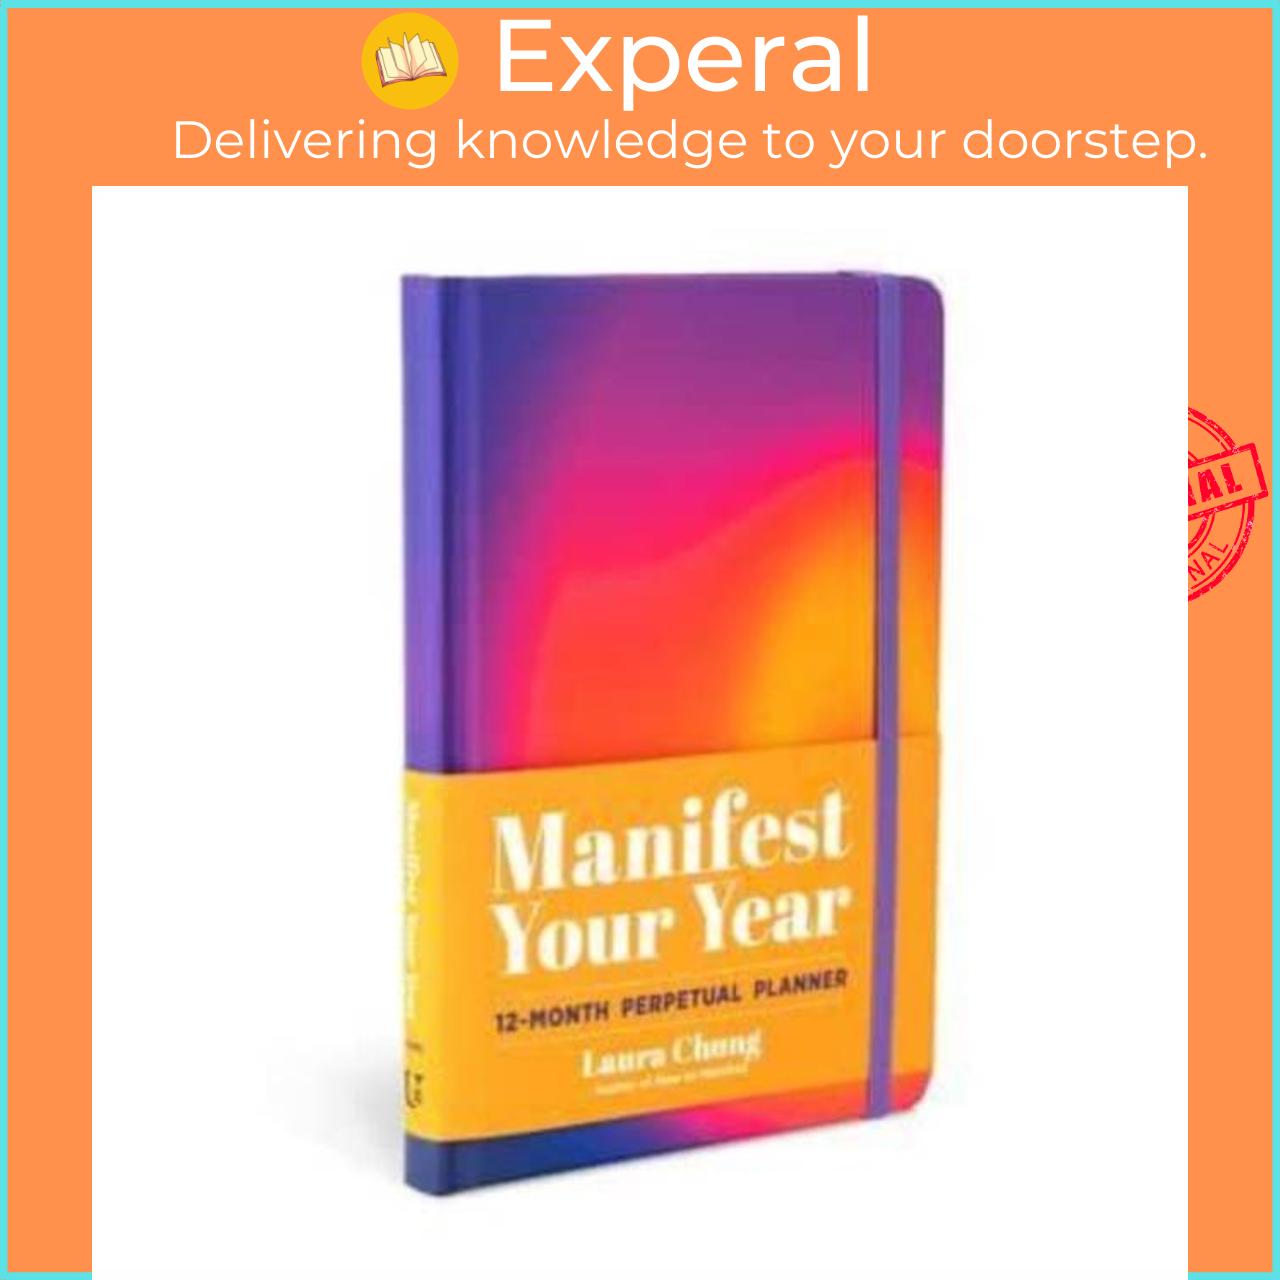 Sách - Manifest Your Year - A 12-Month Perpetual Planner by Laura Chung (UK edition, hardcover)